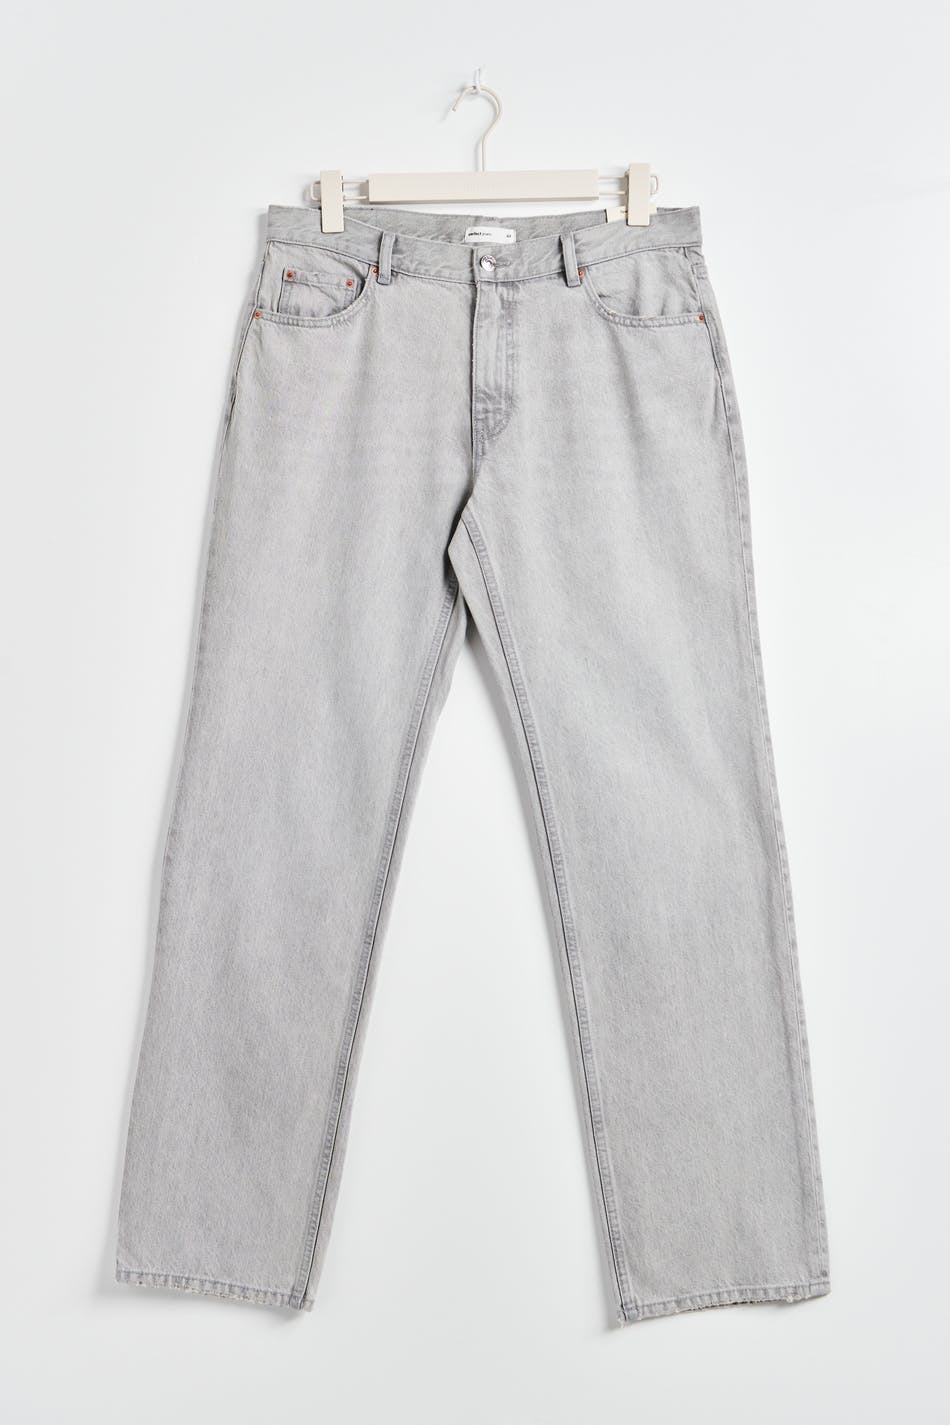  Gina Tricot- Low straight petite jeans - low waist jeans- Grey - 40- Female